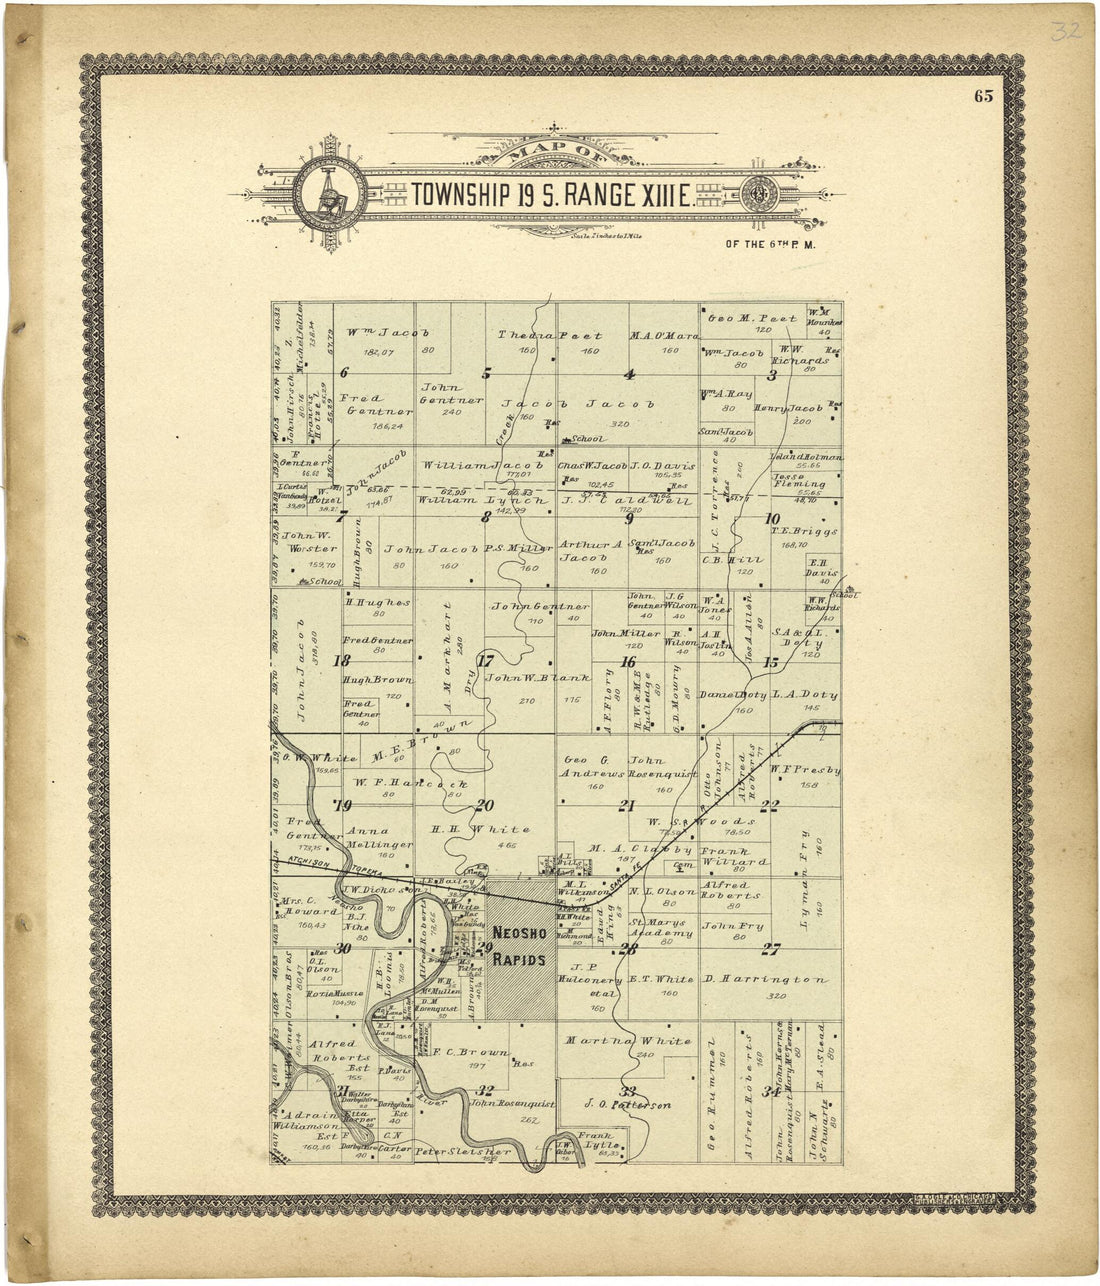 This old map of Map of Township 19 S. Range XIII E. from Standard Atlas of Lyon County, Kansas from 1901 was created by  Geo. A. Ogle &amp; Co in 1901